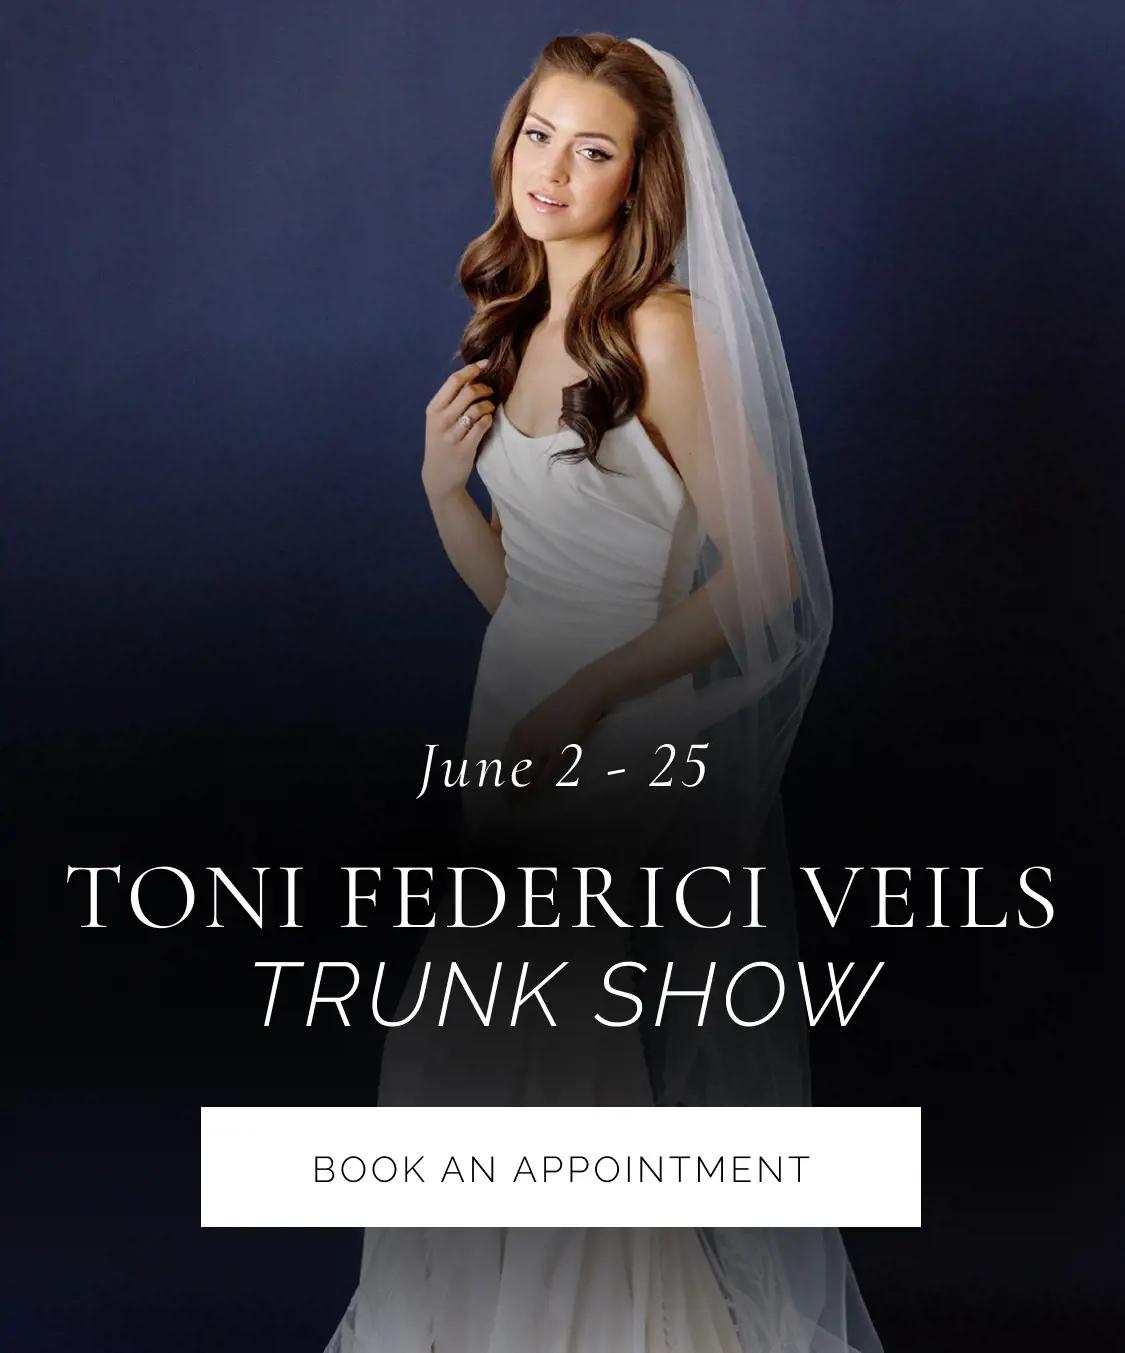 "Toni Federici Veils Trunk Show" banner for mobile